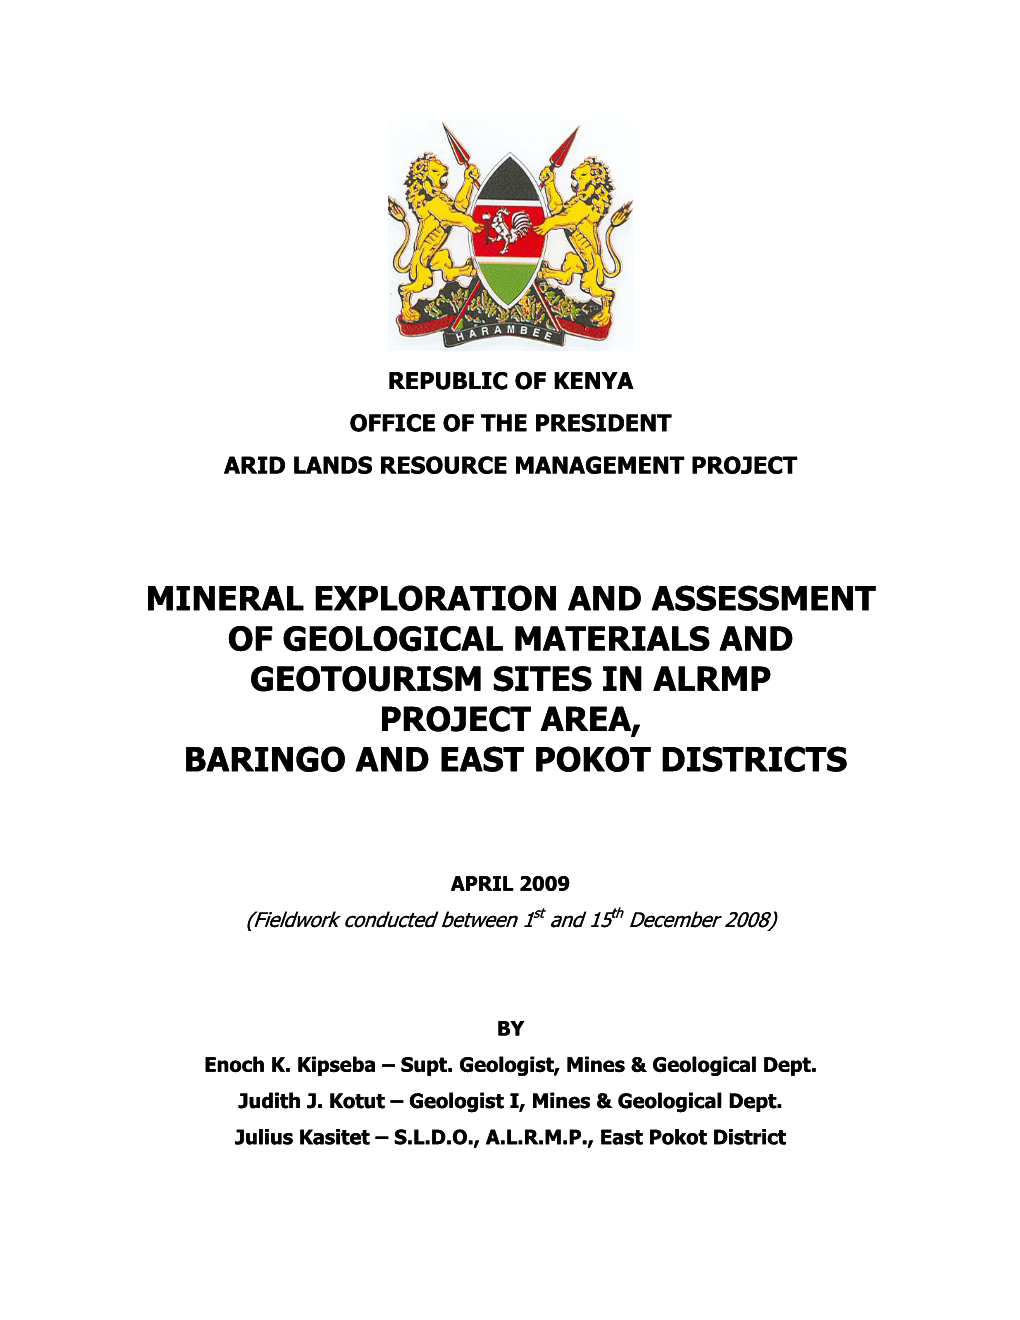 Mineral Exploration and Assessment of Geological